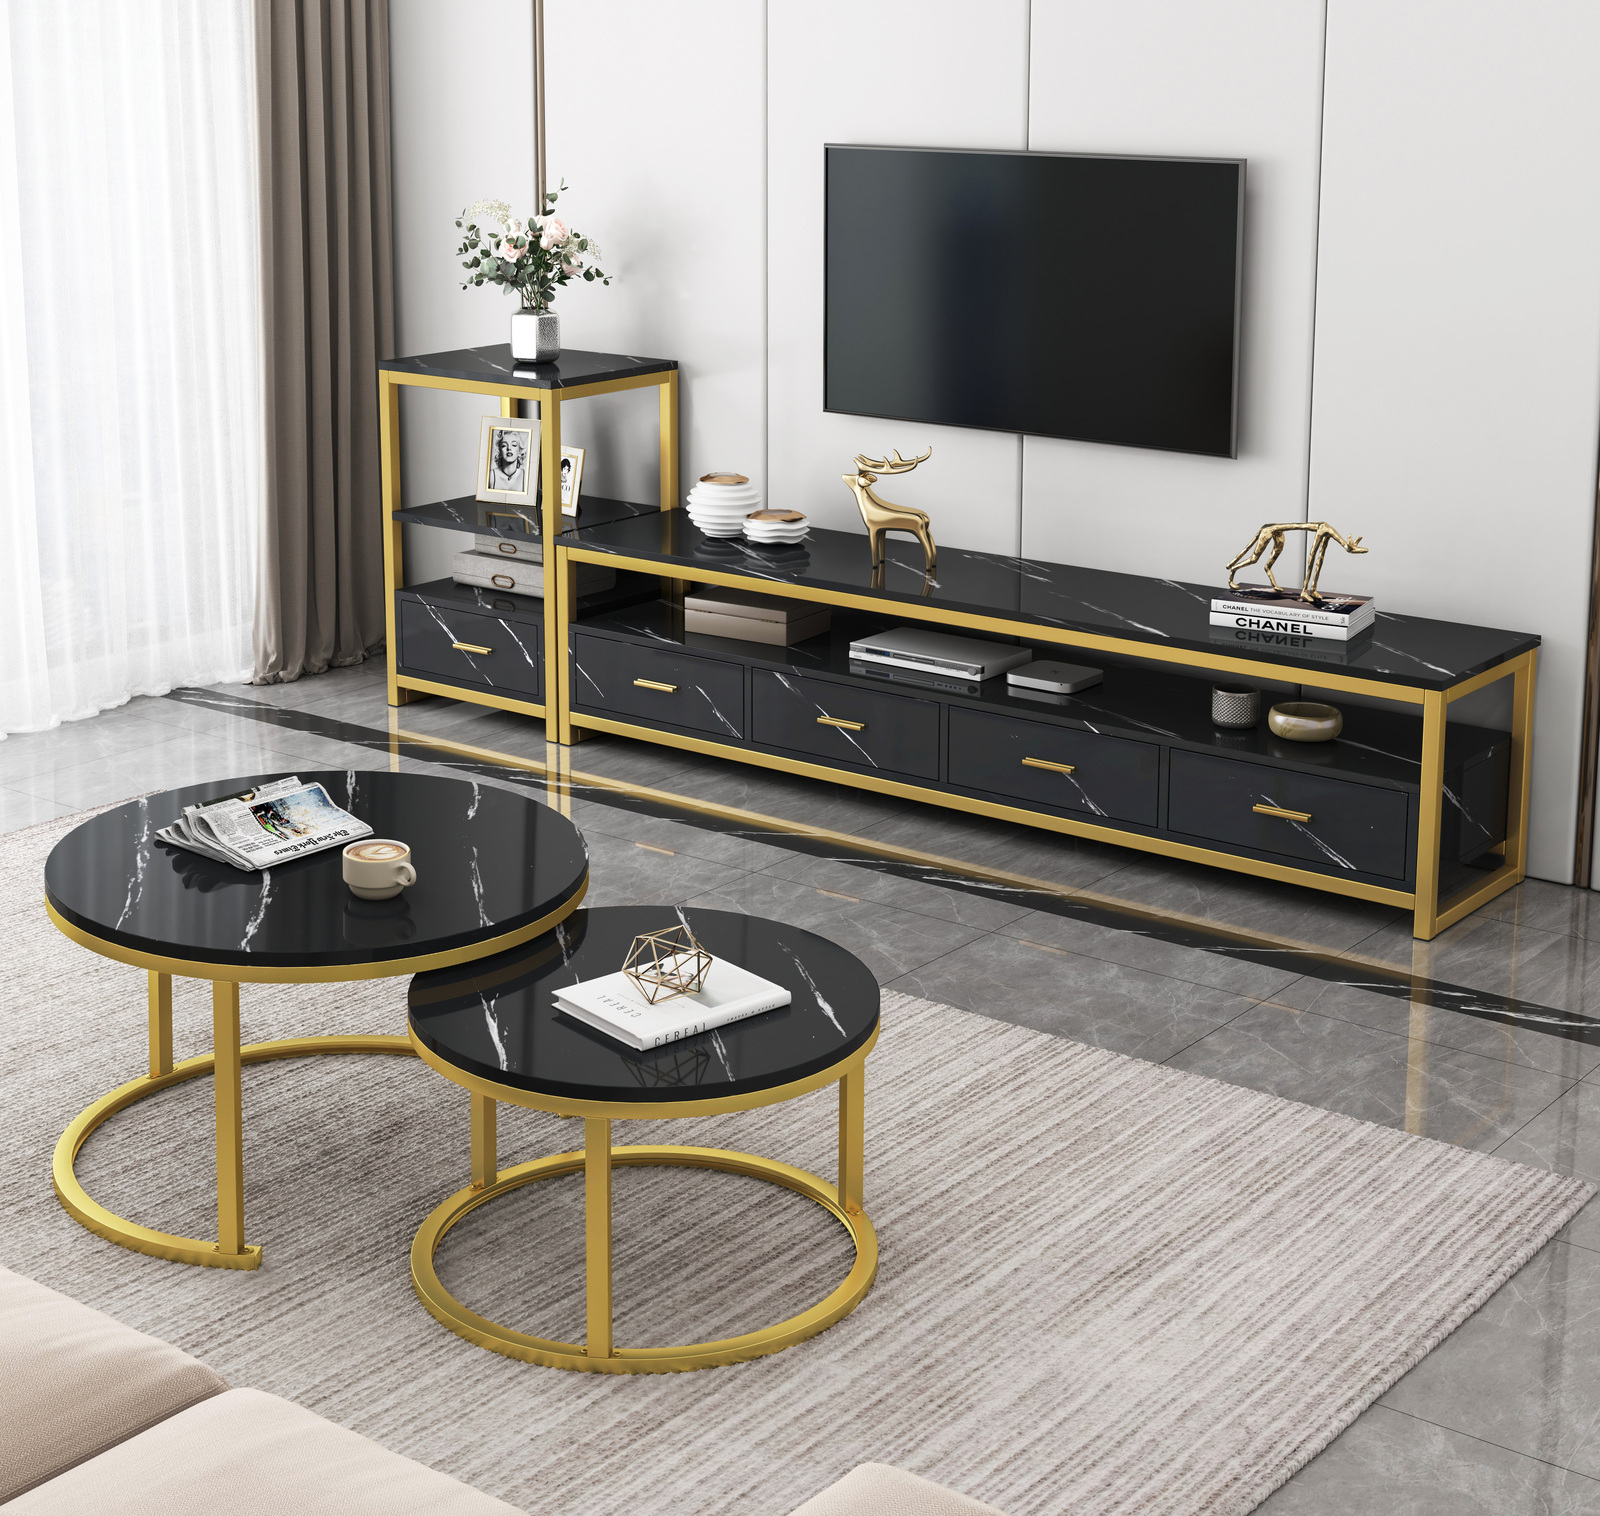 3-Piece Set Synergy Luxury Marble Look Coffee Table, TV Cabinet & Side Table (Black)